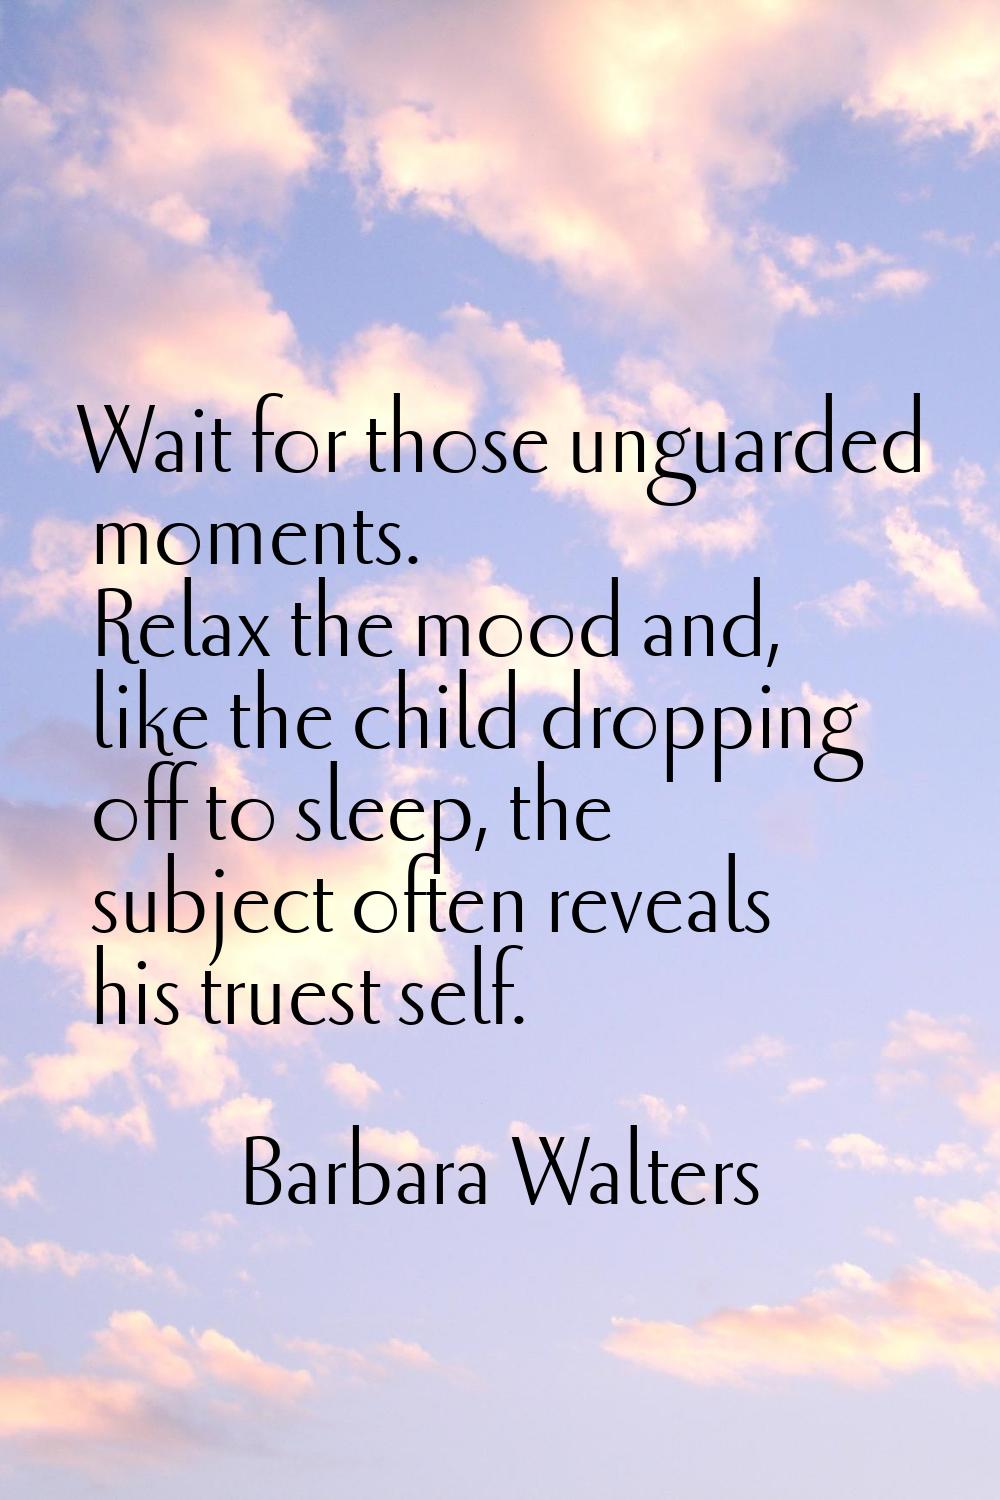 Wait for those unguarded moments. Relax the mood and, like the child dropping off to sleep, the sub